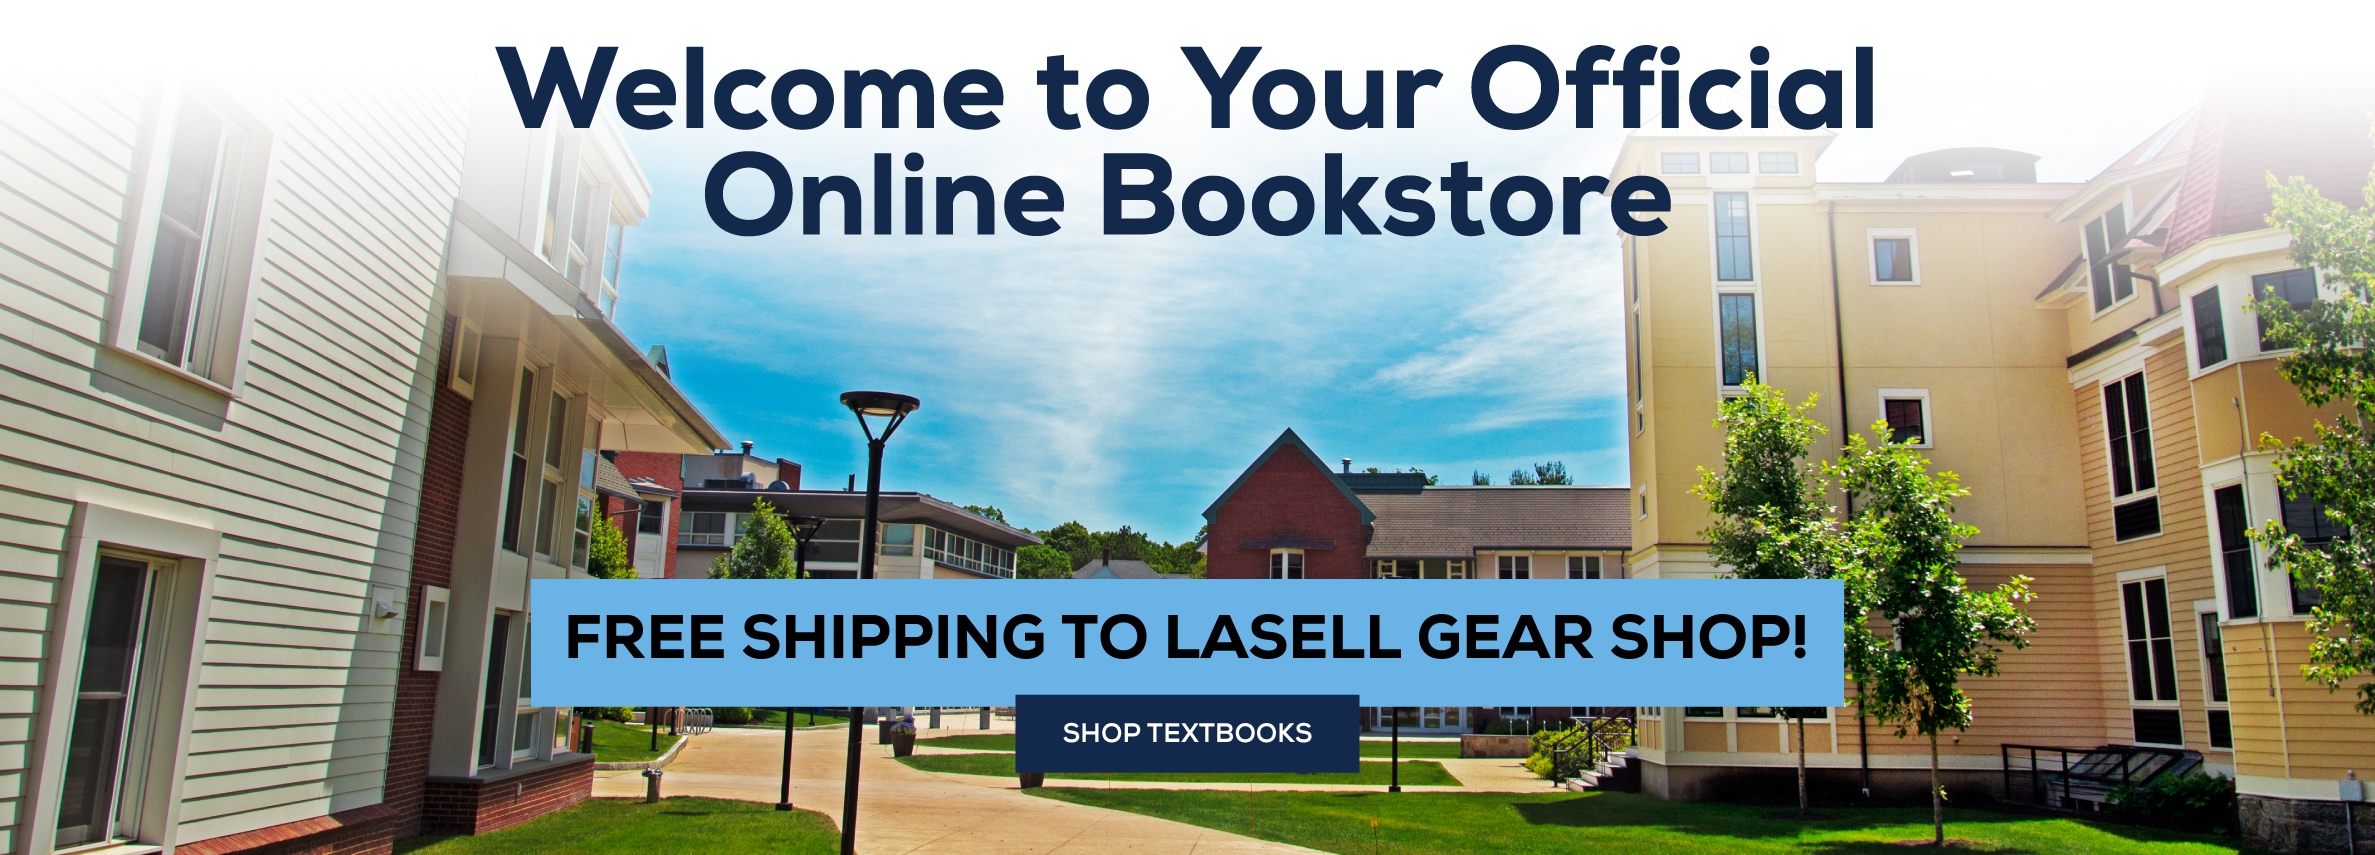 Welcome to Your Official Online Bookstore. Free Shipping to Lasell Gear Shop. Shop Textbooks.